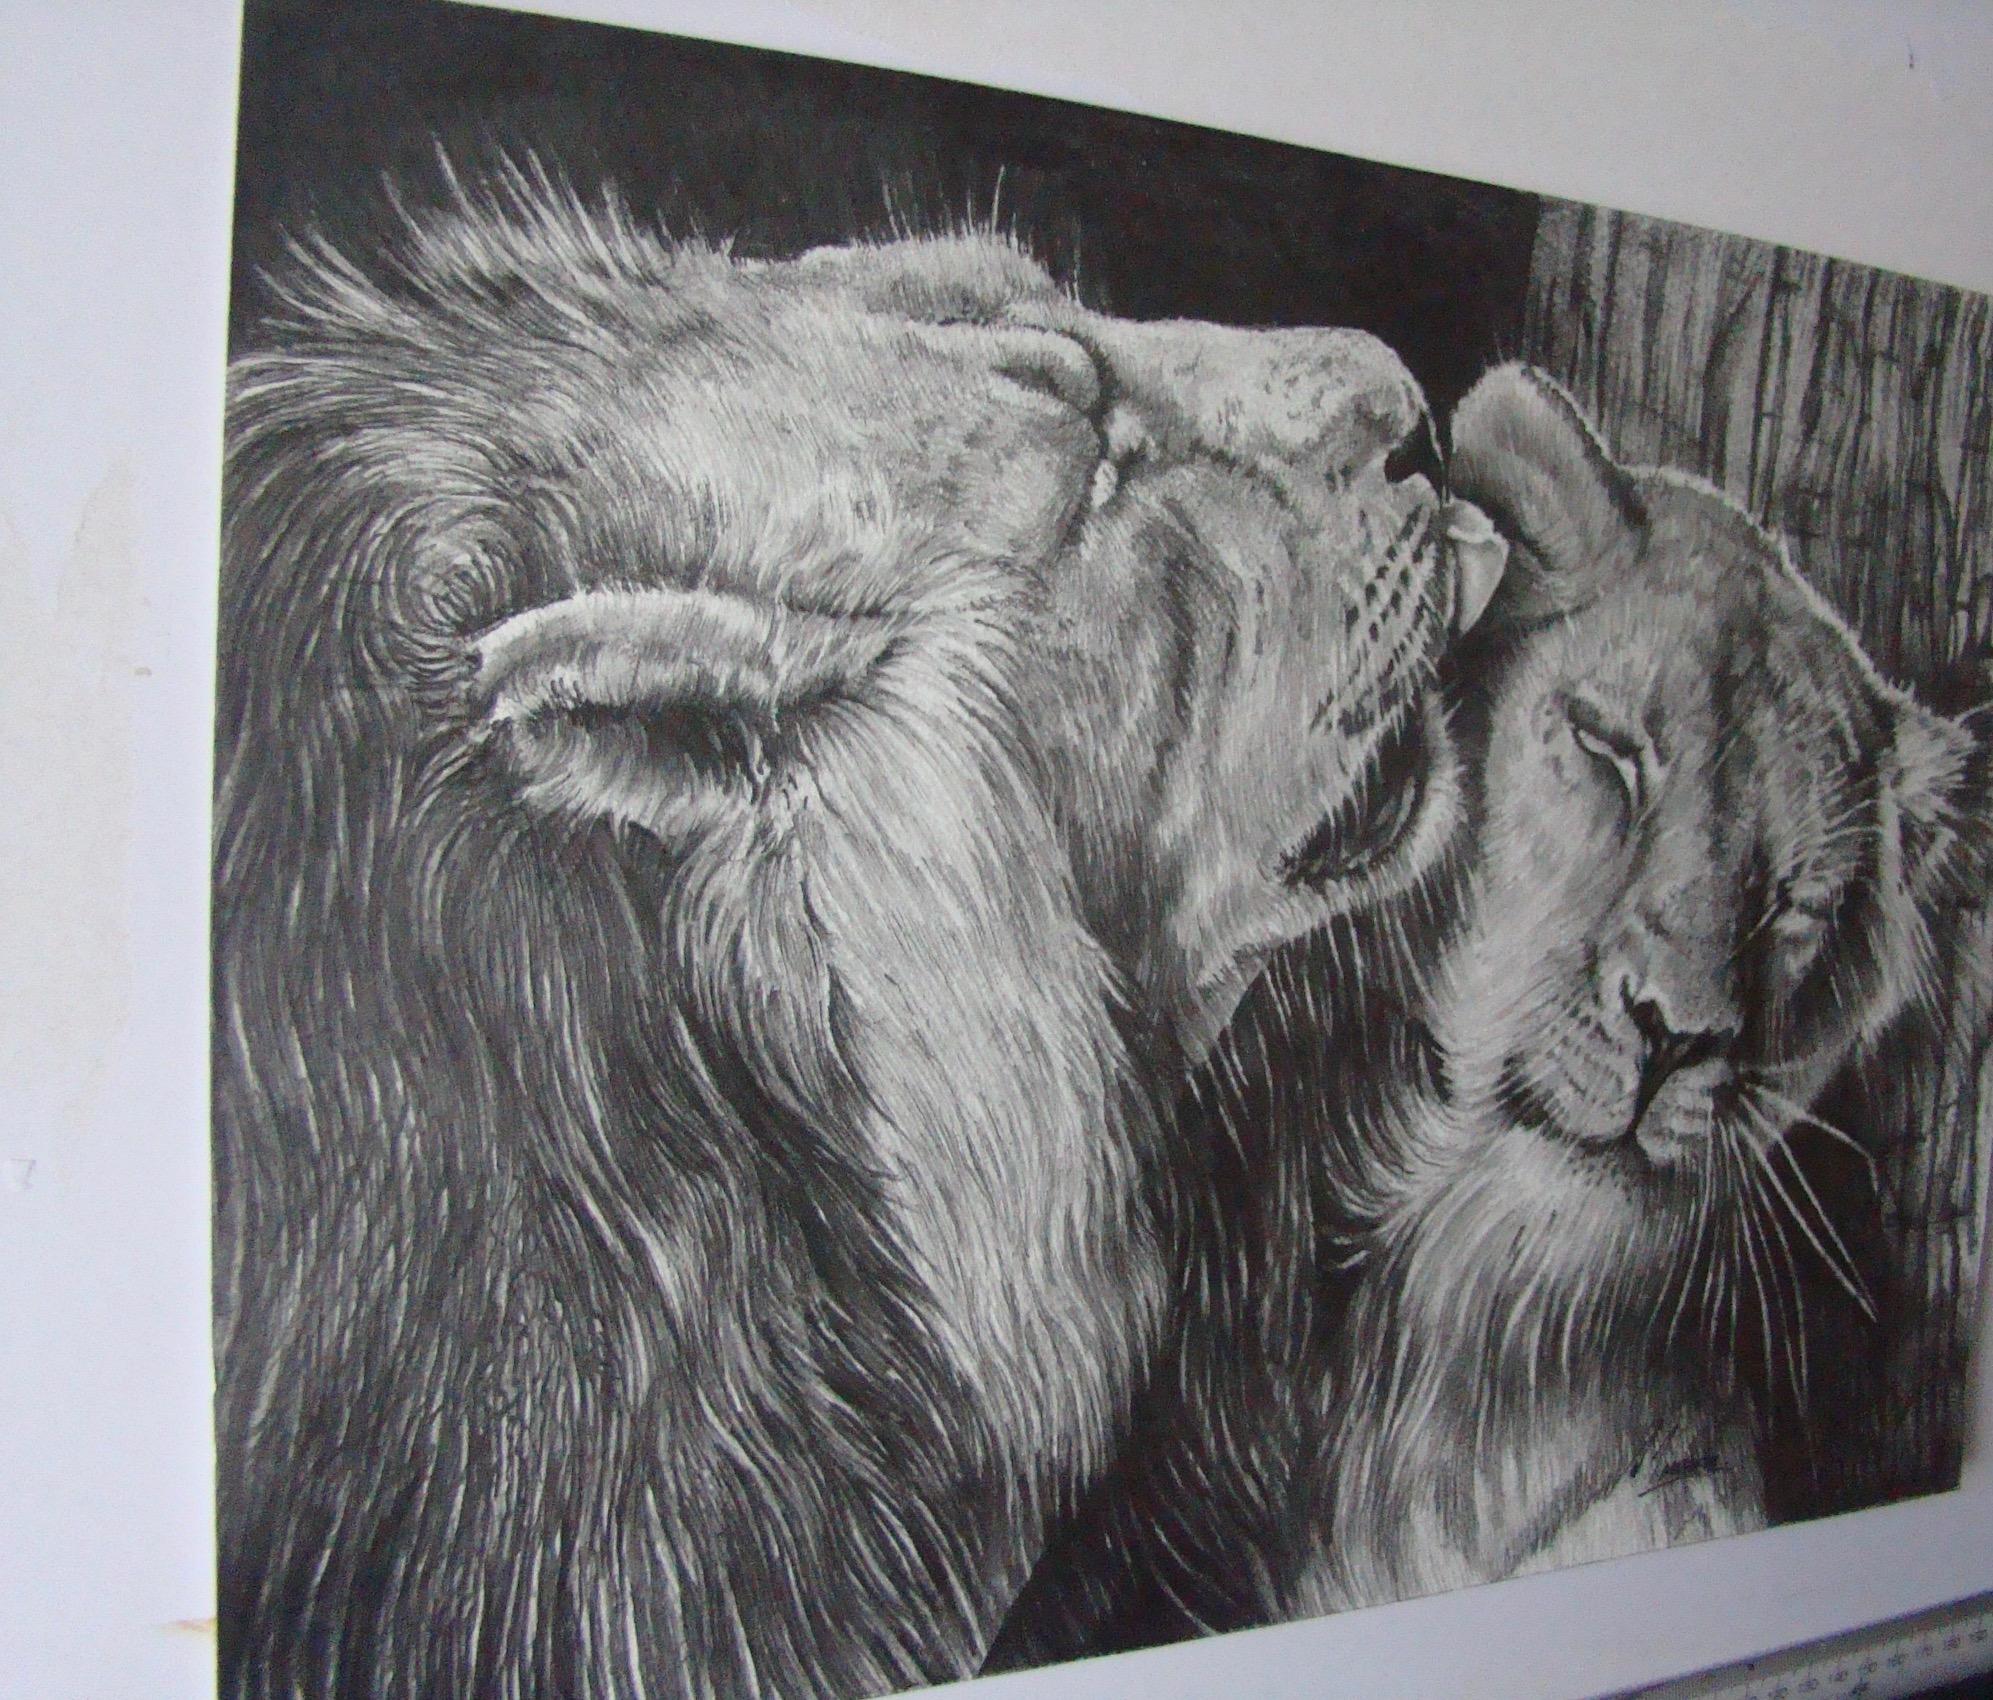 Graphite artwork entitled 'Wild Affection', showing male lion affectionately licking female lion.

David Truman artist offers original paintings and limited edition prints exclusively with Wychwood Art. David Truman is based in Lincolnshire and